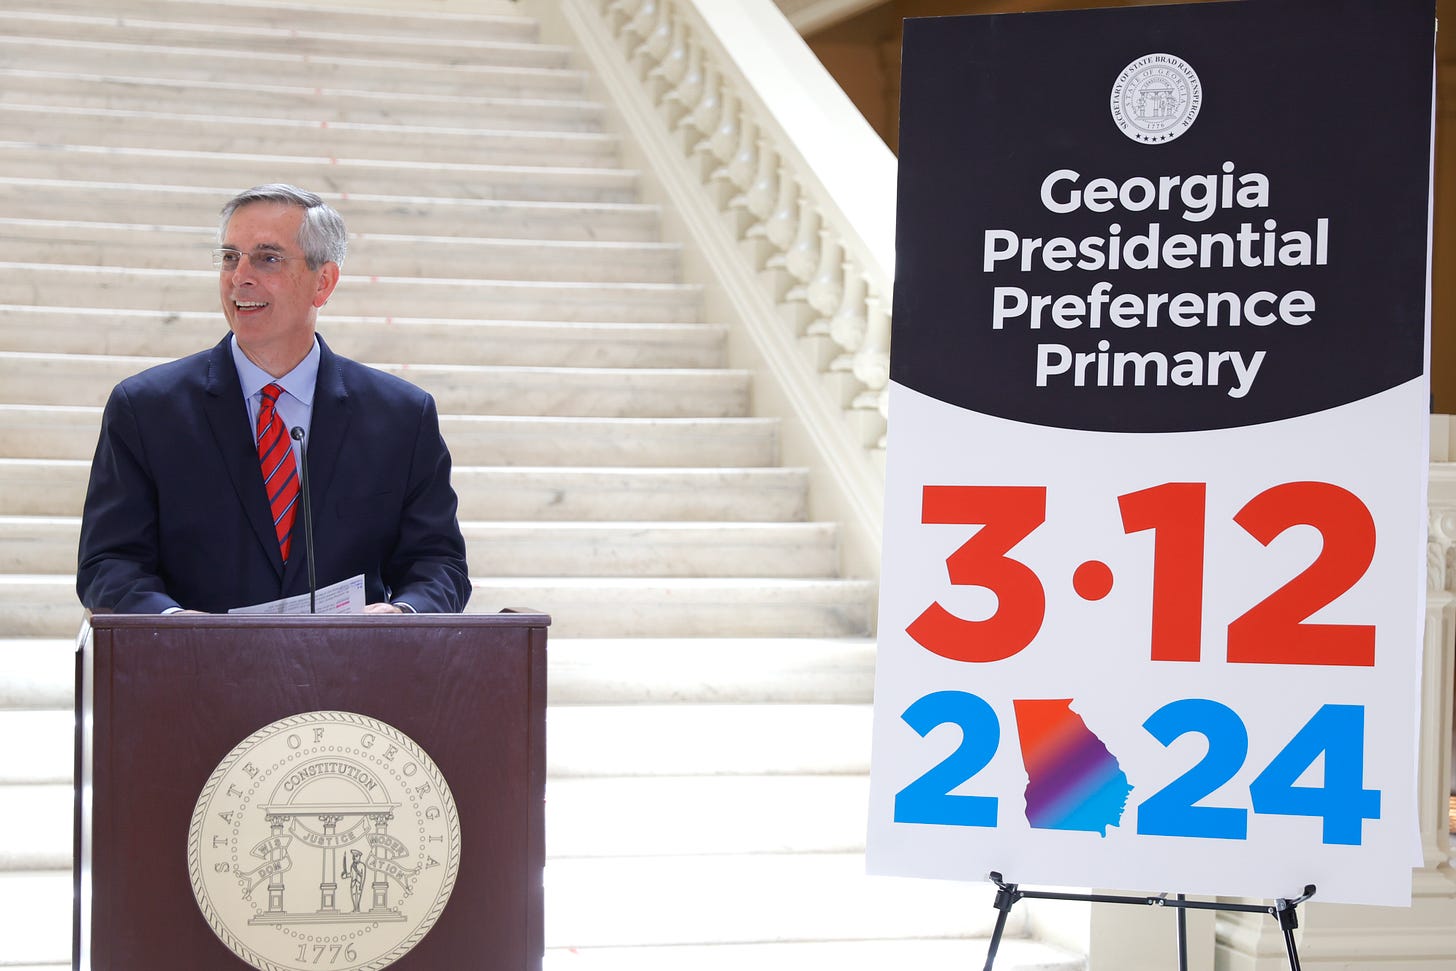 Presidential primary in Georgia scheduled for March 12, 2024